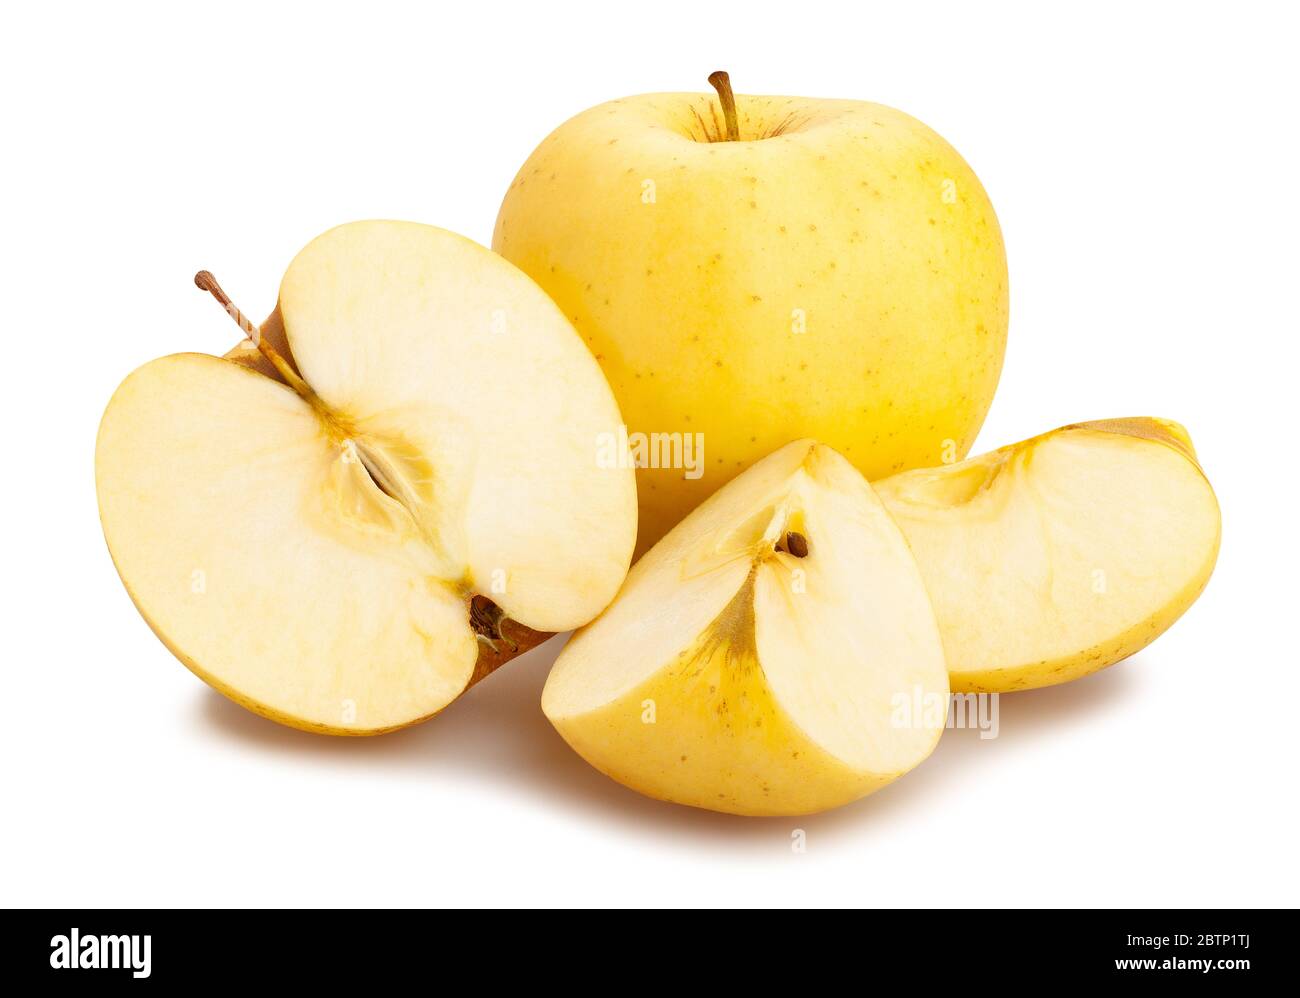 sliced golden delicious apples path isolated on white Stock Photo